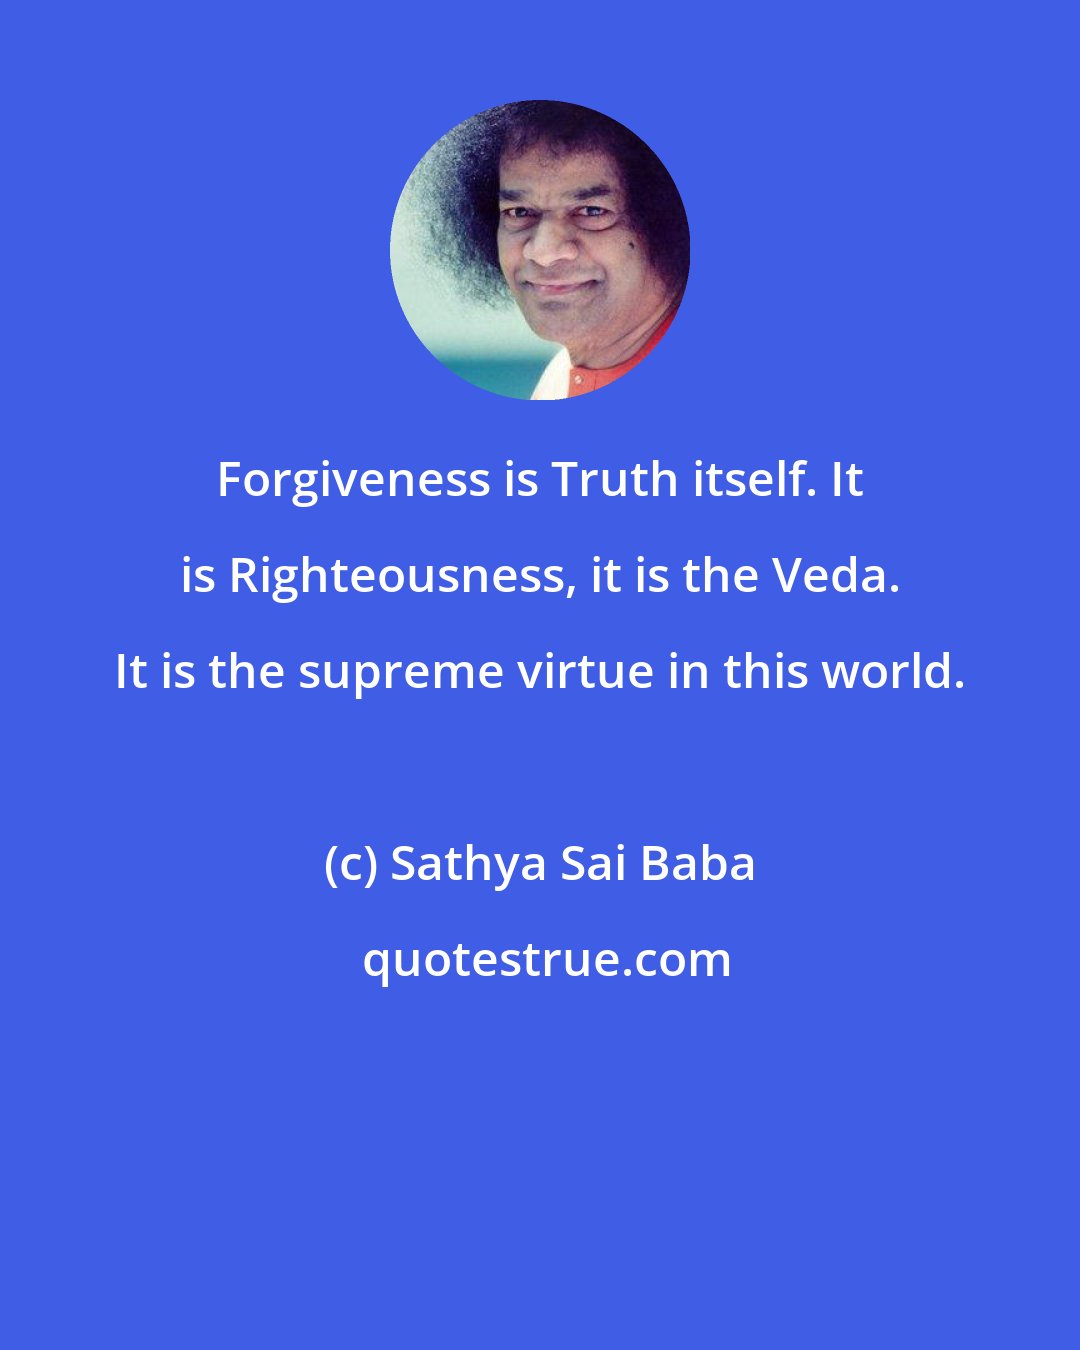 Sathya Sai Baba: Forgiveness is Truth itself. It is Righteousness, it is the Veda. It is the supreme virtue in this world.